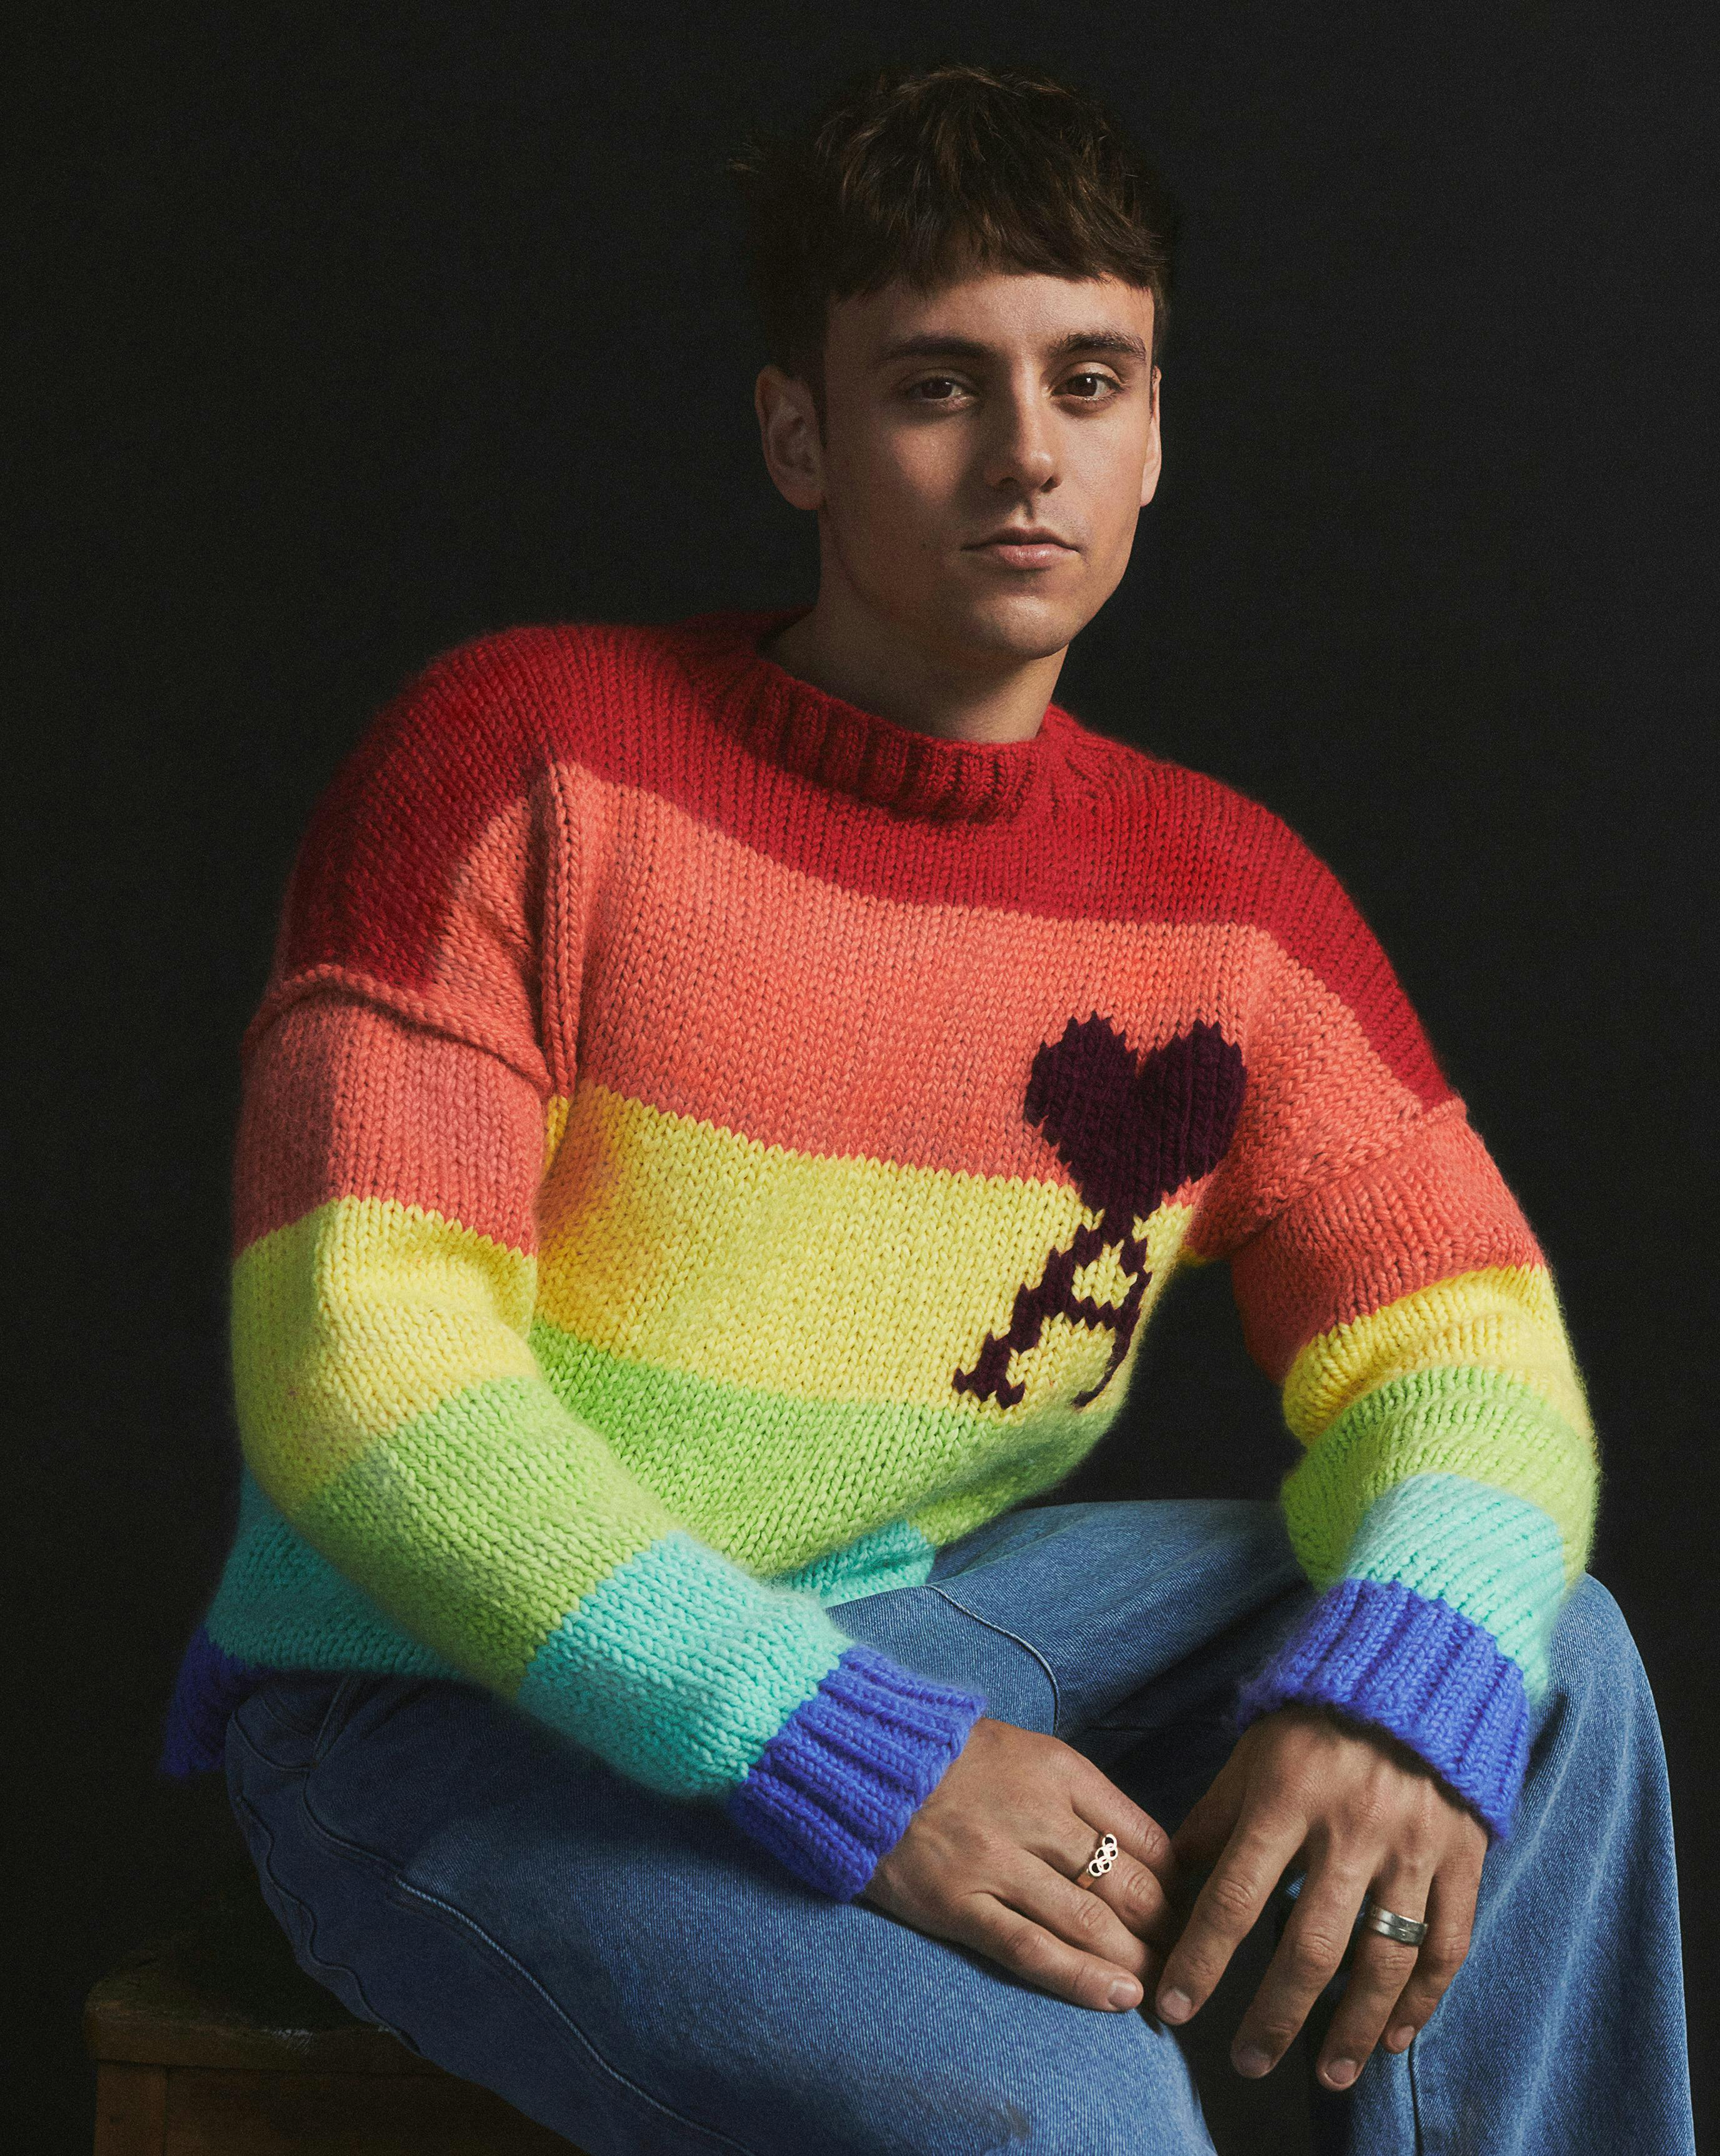 Athlete Tom Daley wearing a rainbow striped sweater.